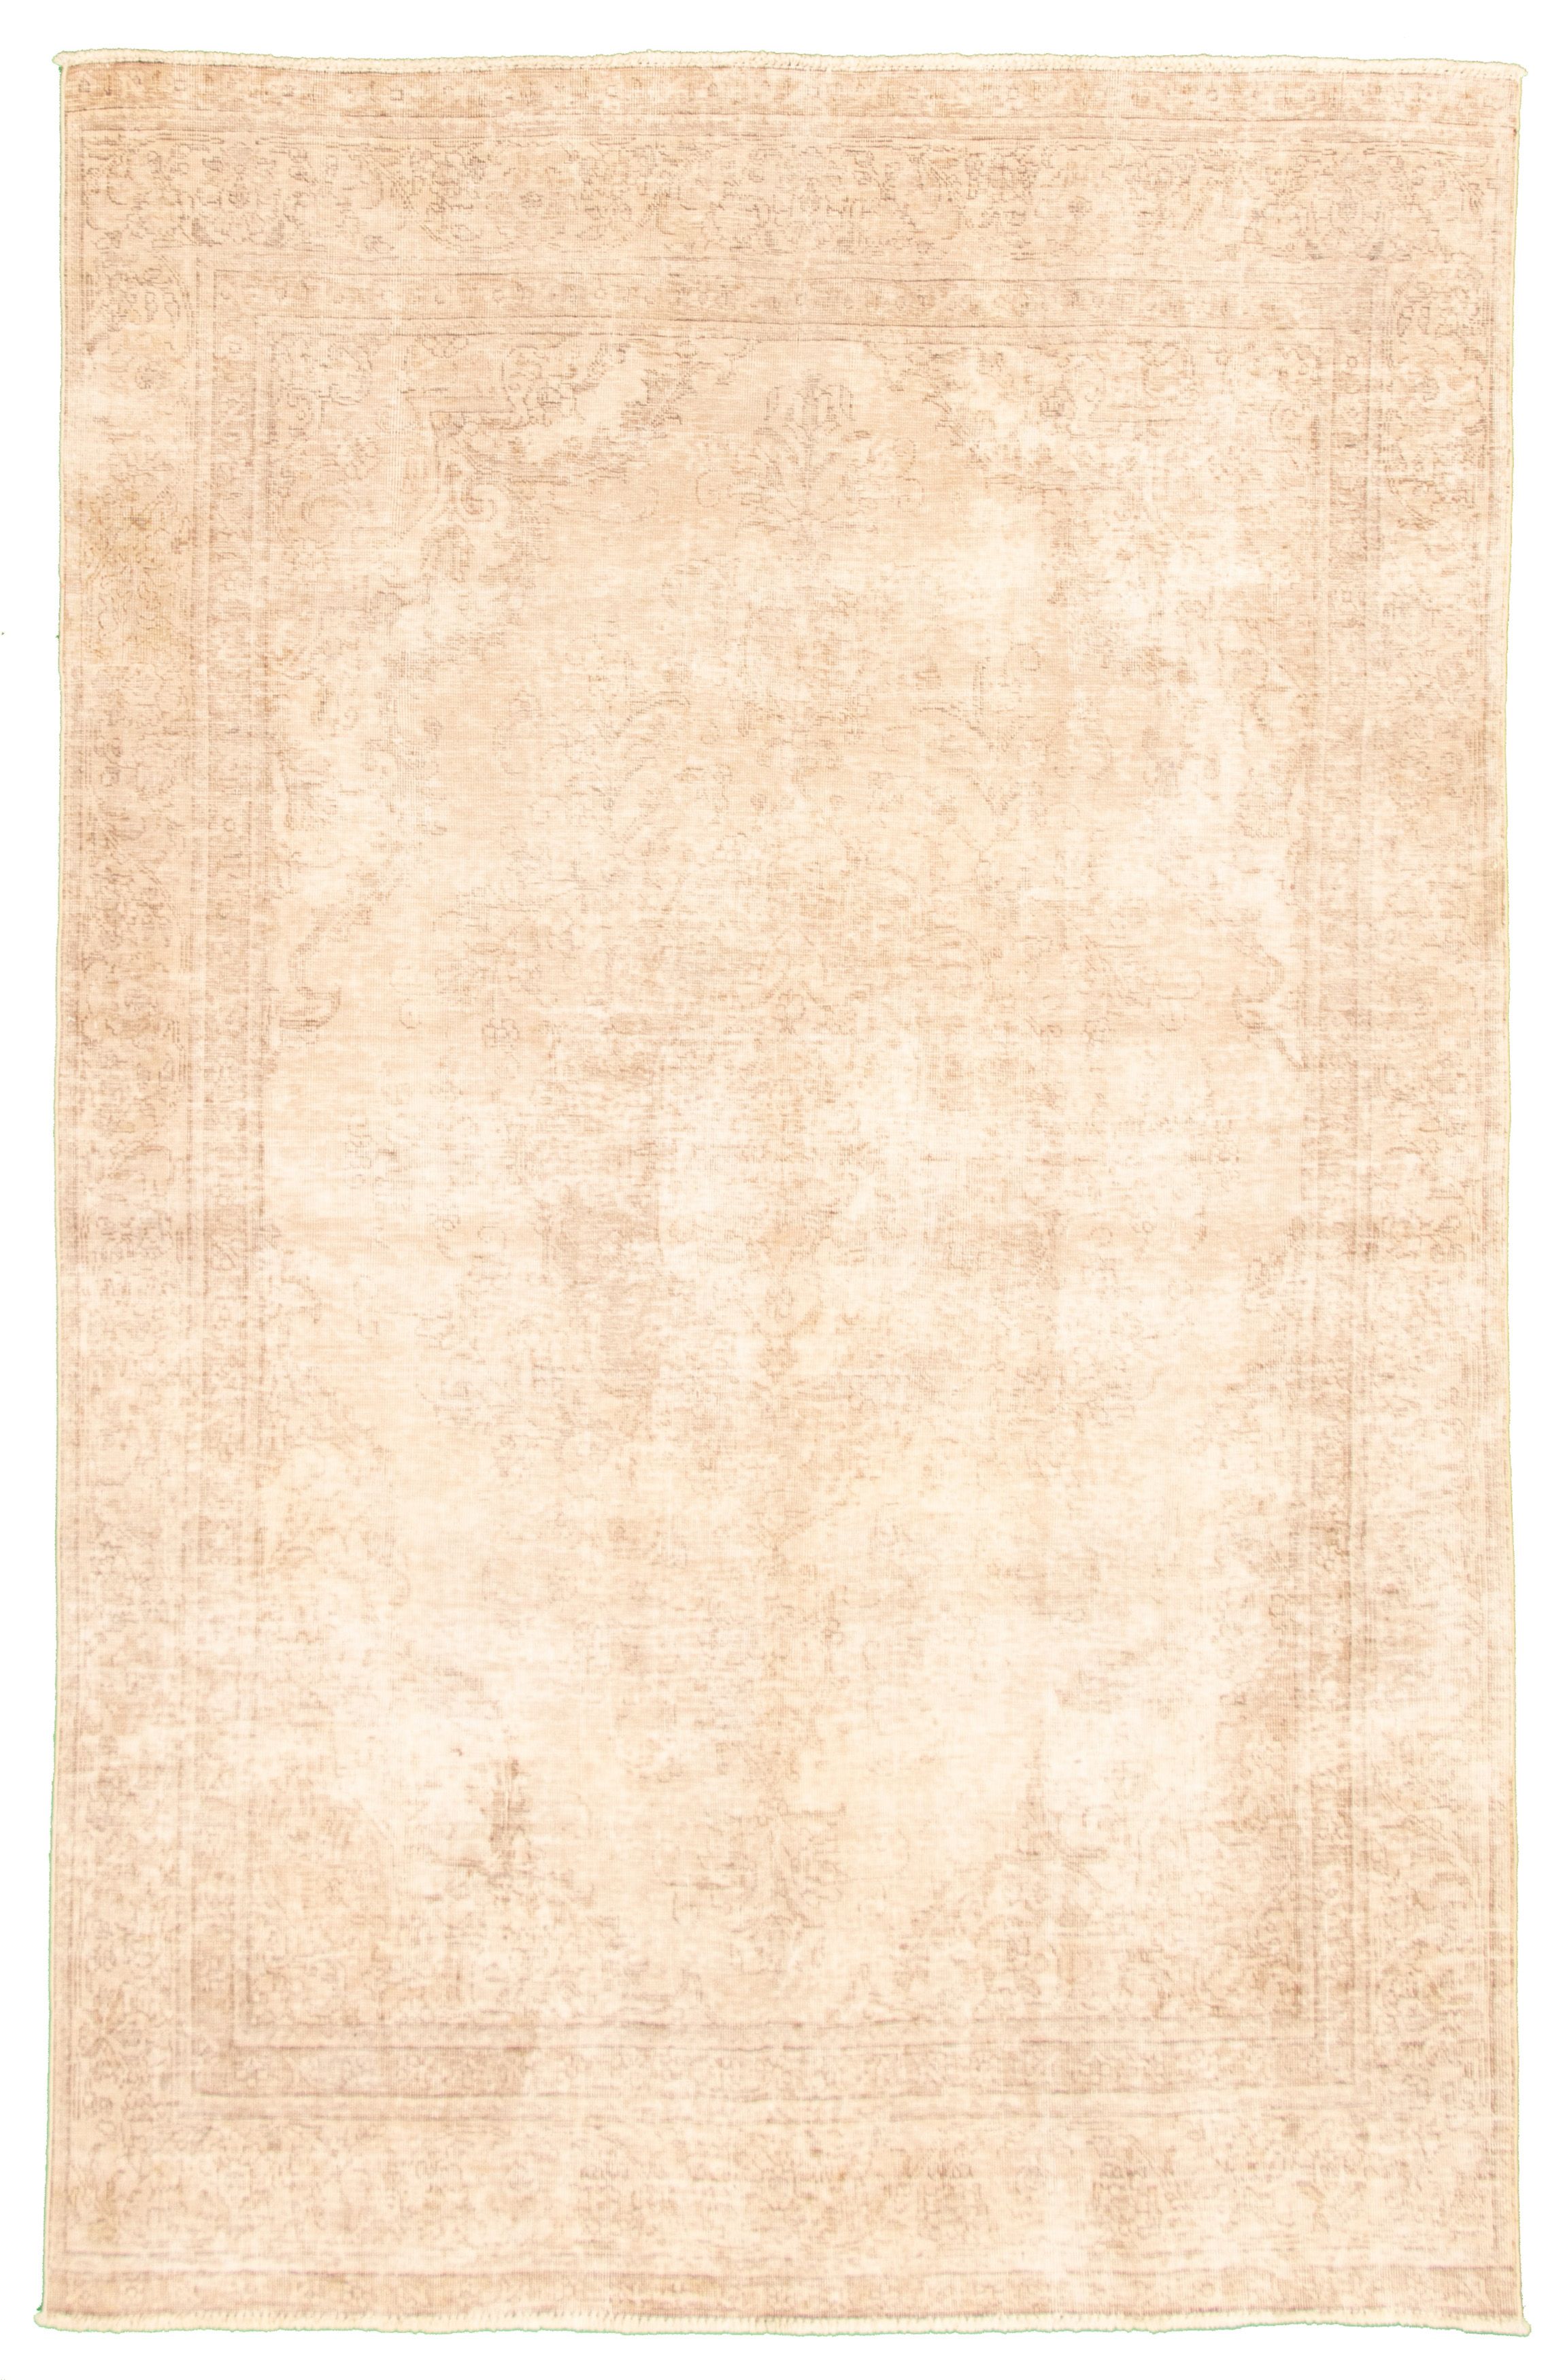 Hand-knotted Antalya Vintage Tan Wool Rug 6'7" x 10'5" Size: 6'7" x 10'5"  